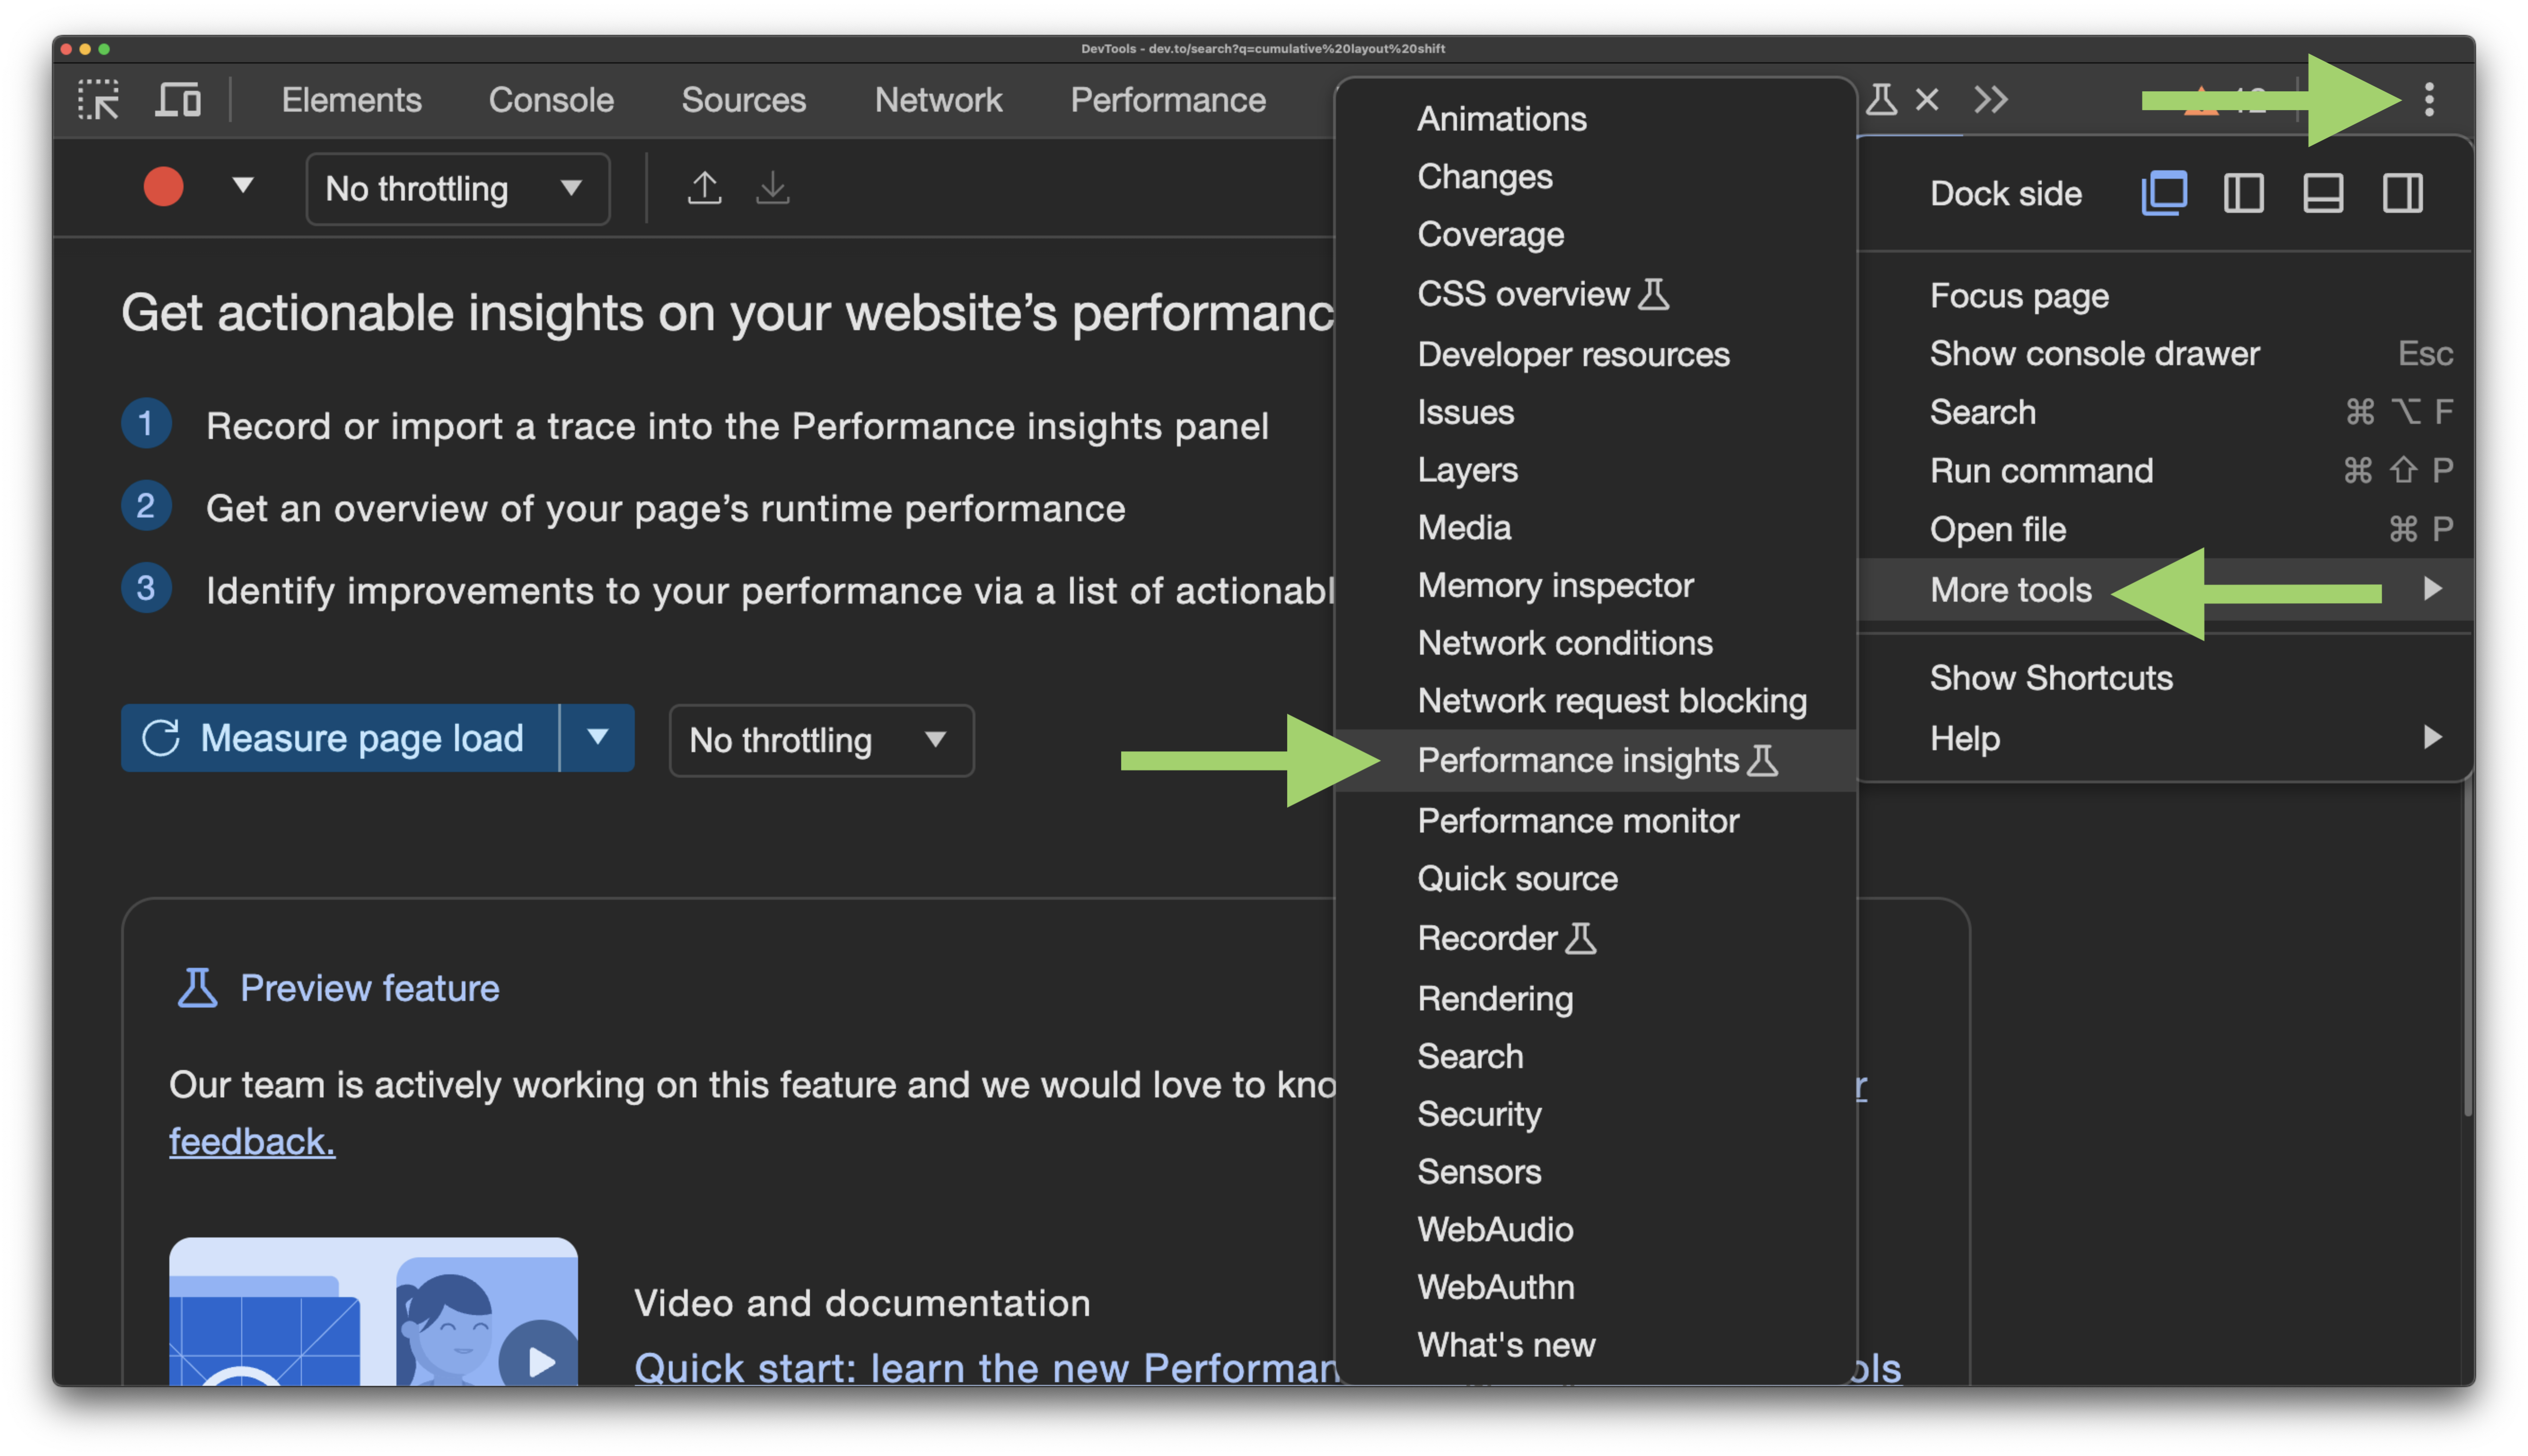 The more options menu is open in Chrome dev tools. An arrow is pointing to the three dot more options menu. Below that, a green arrow is pointing to the more tools item. Another menu is open to the left, and a green arrow is pointing to performance insights which has a little conical flask next to it, indicating experimental.